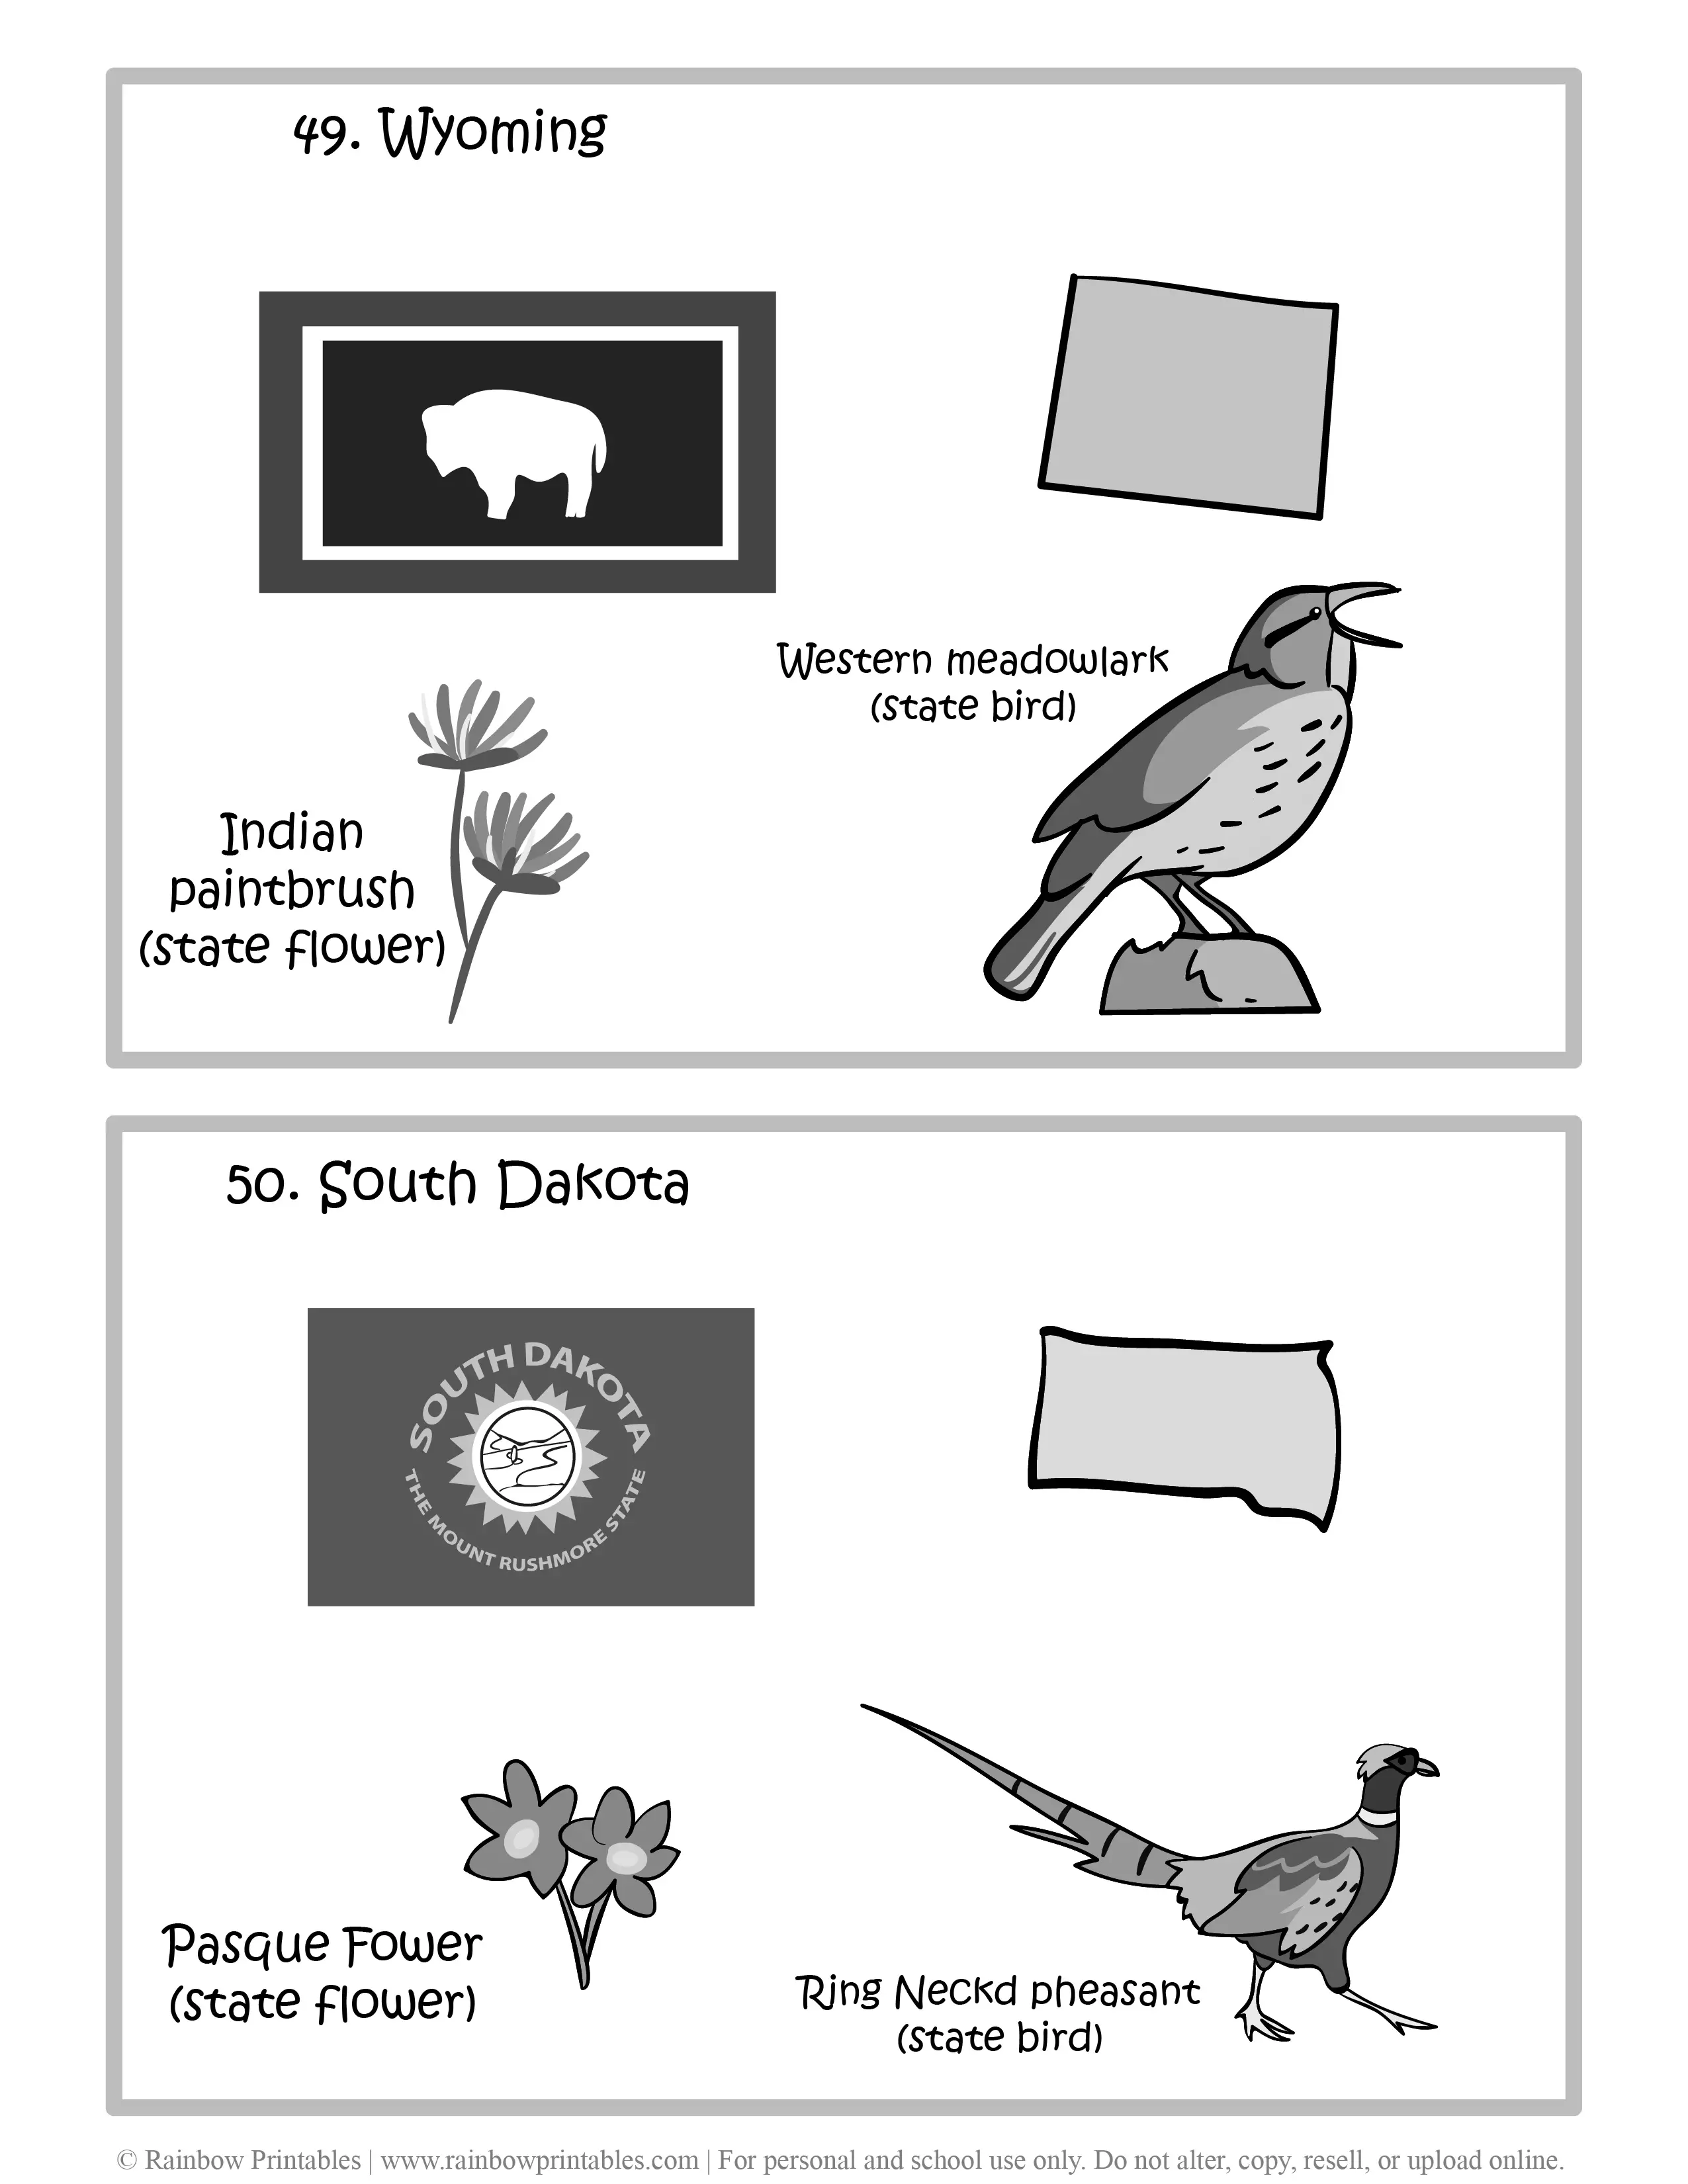 Wyoming, South Dakota, 50 US State Flag, State Bird, State Flower, United States of America - American States Geography Worksheet Class Lesson Printables Flashcards Black White